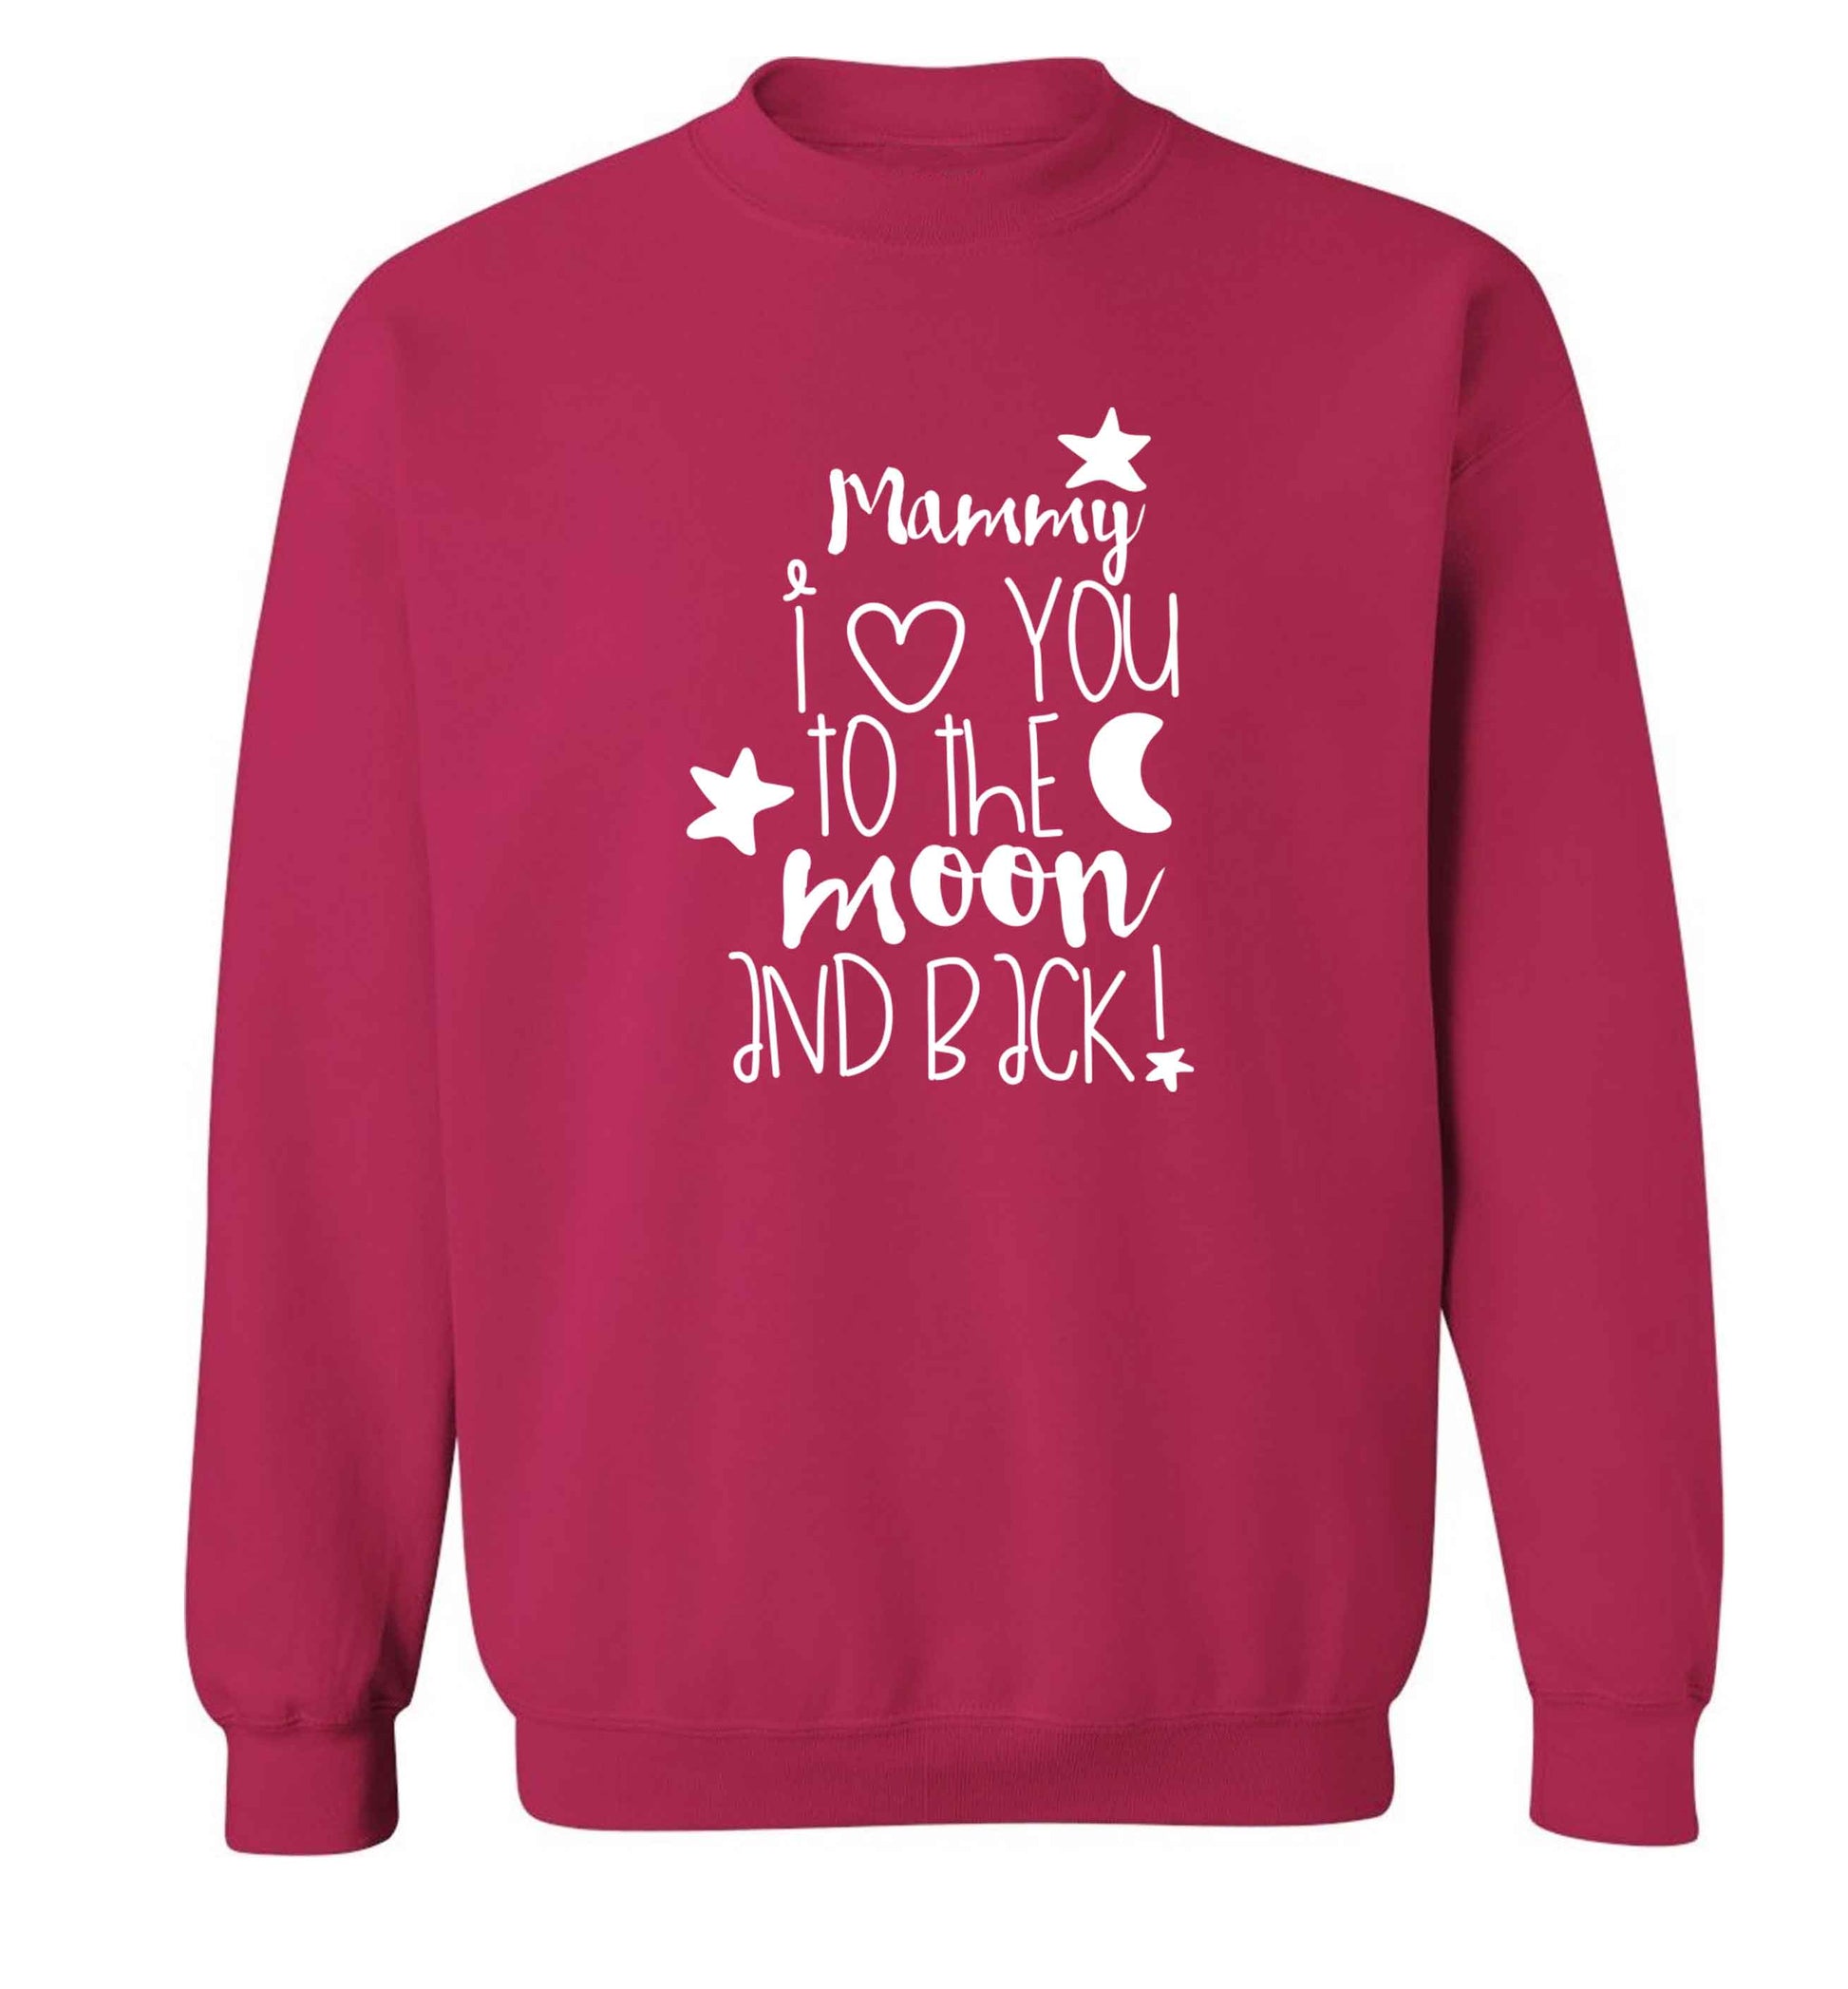 Mammy I love you to the moon and back adult's unisex pink sweater 2XL